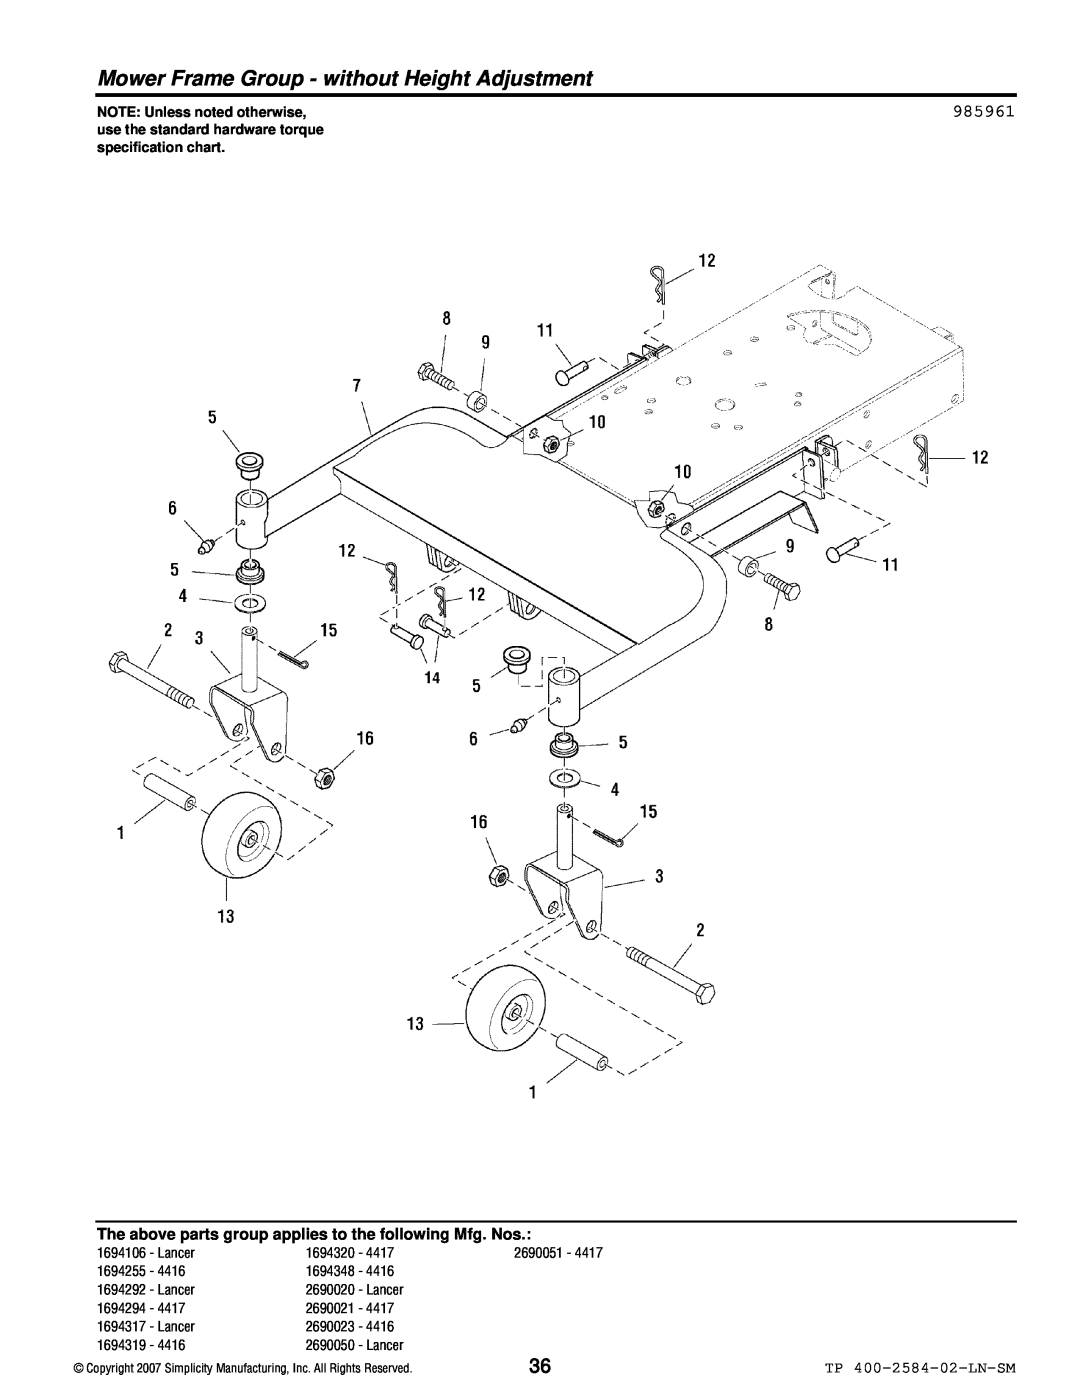 Simplicity Lancer / 4400 manual Mower Frame Group - without Height Adjustment, 985961, TP 400-2584-02-LN-SM 